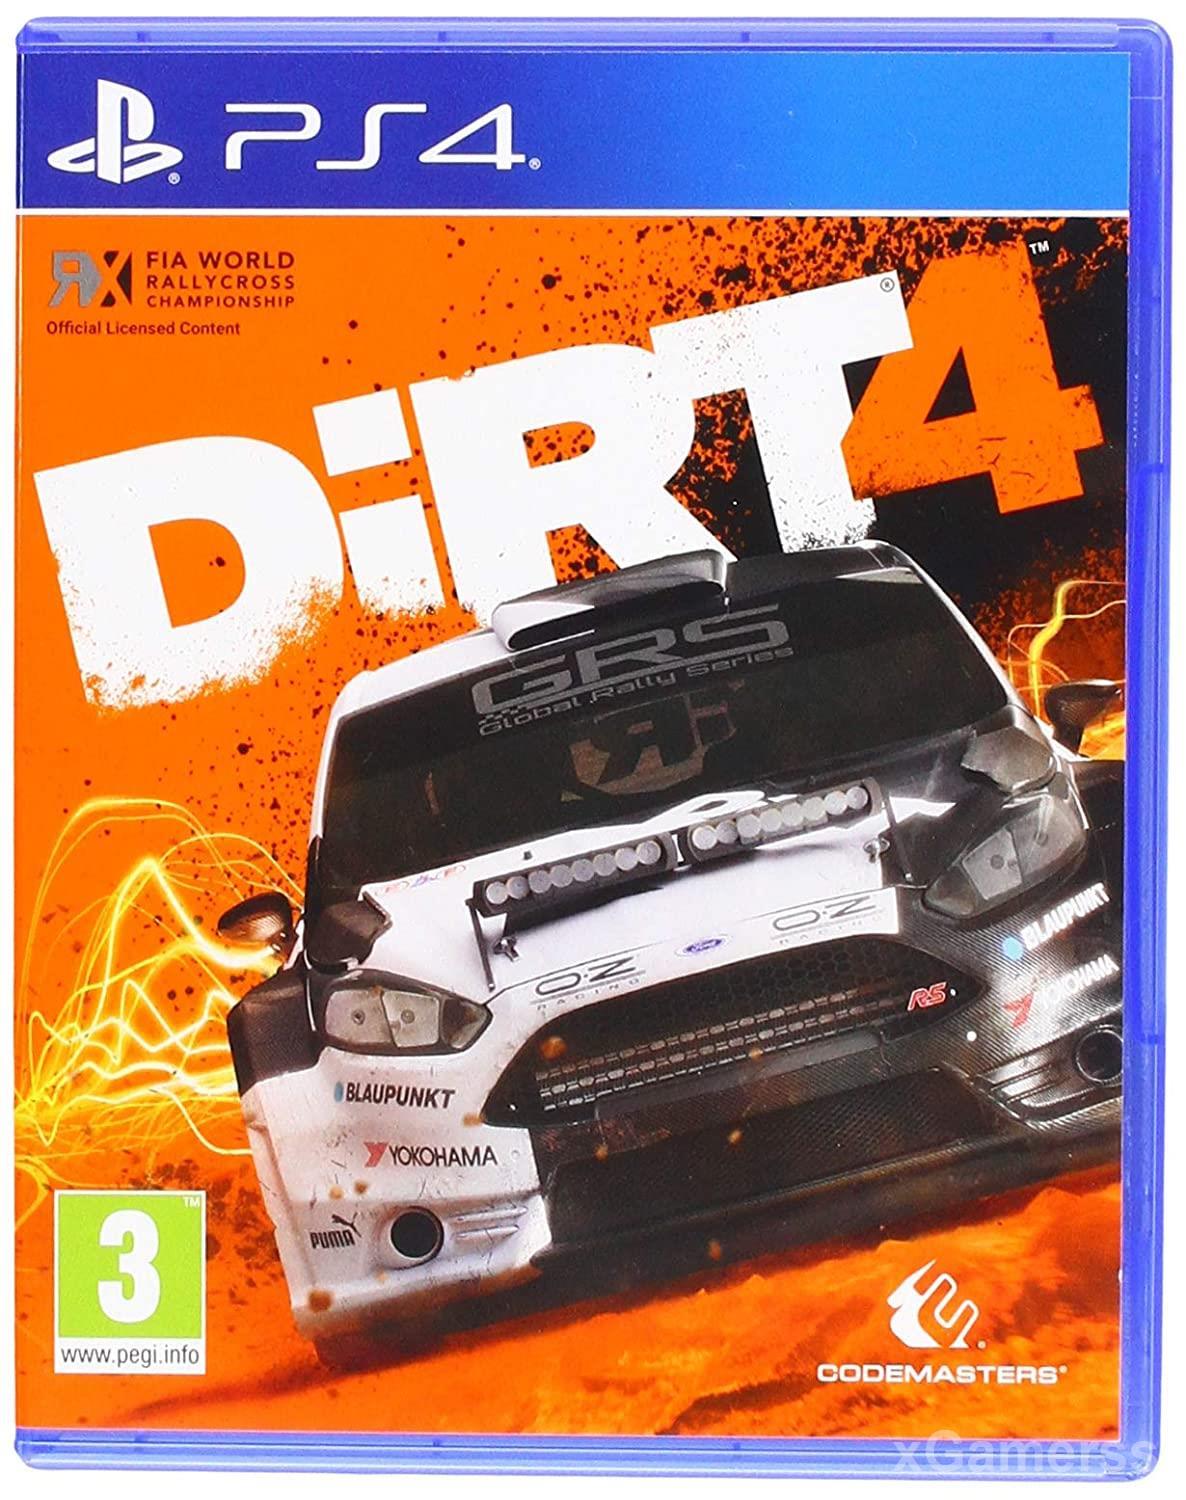 DiRT 4 - great adventure and excitement in rally racing